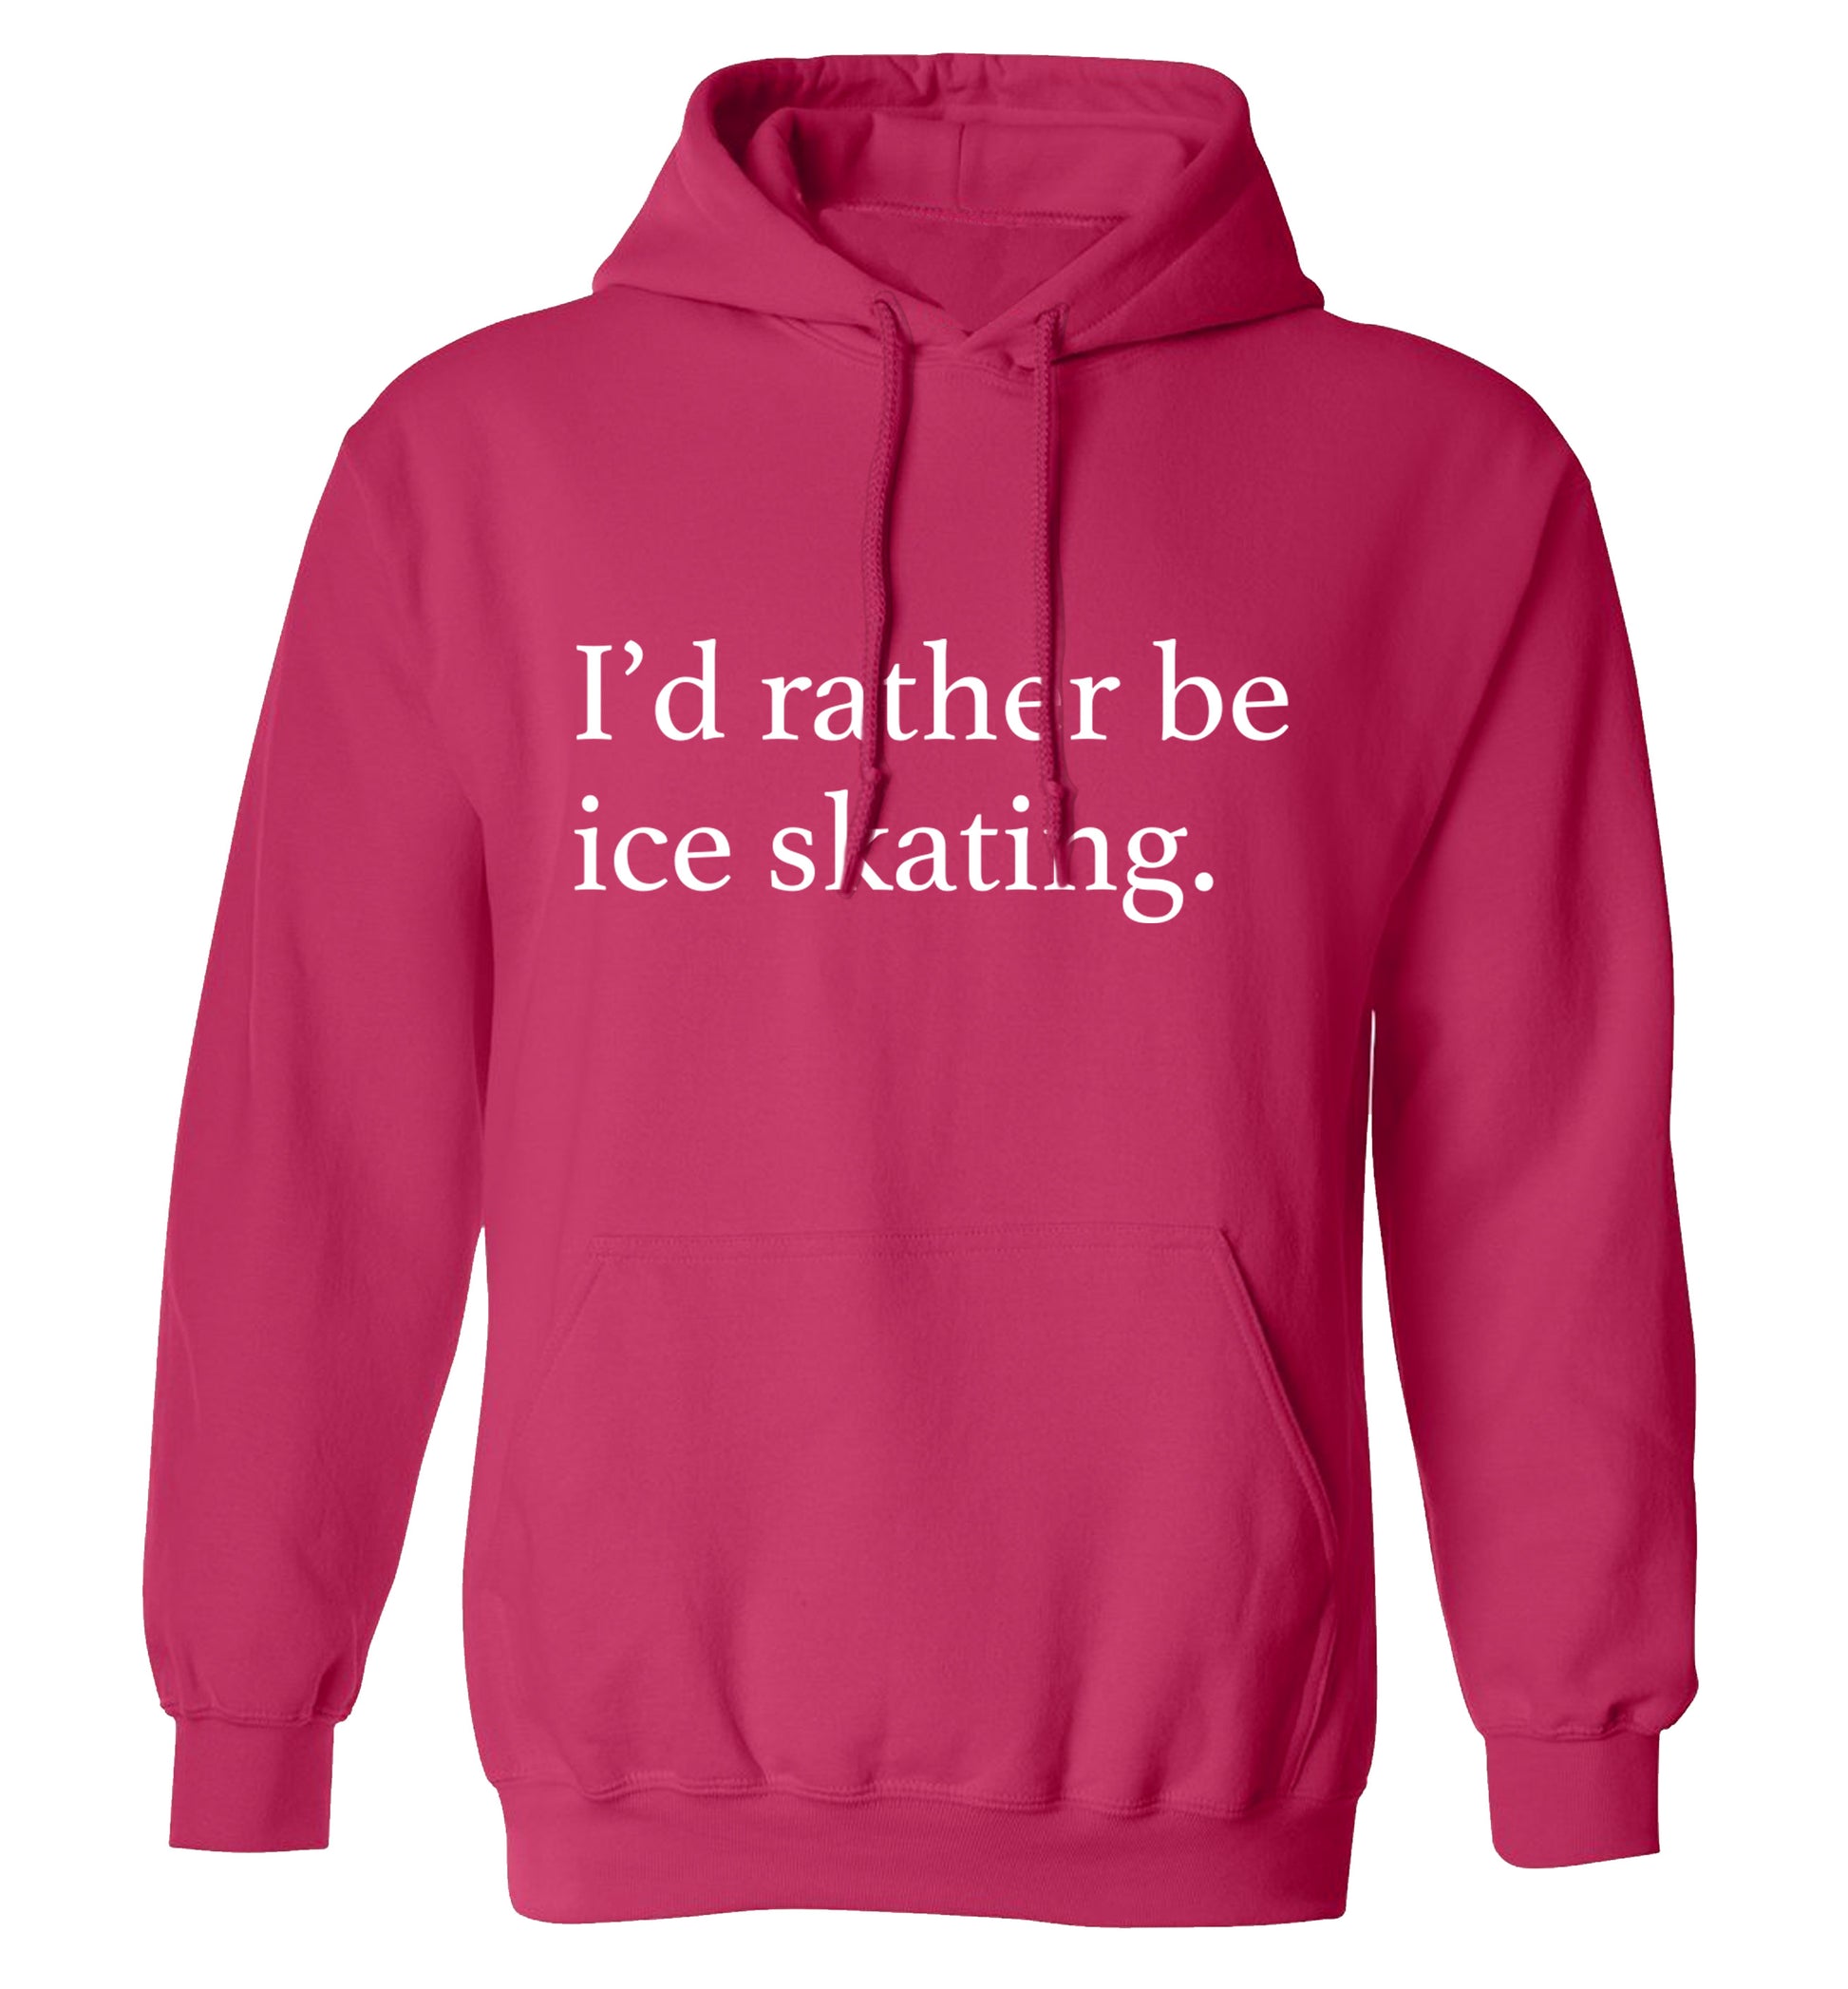 I'd rather be ice skating adults unisexpink hoodie 2XL